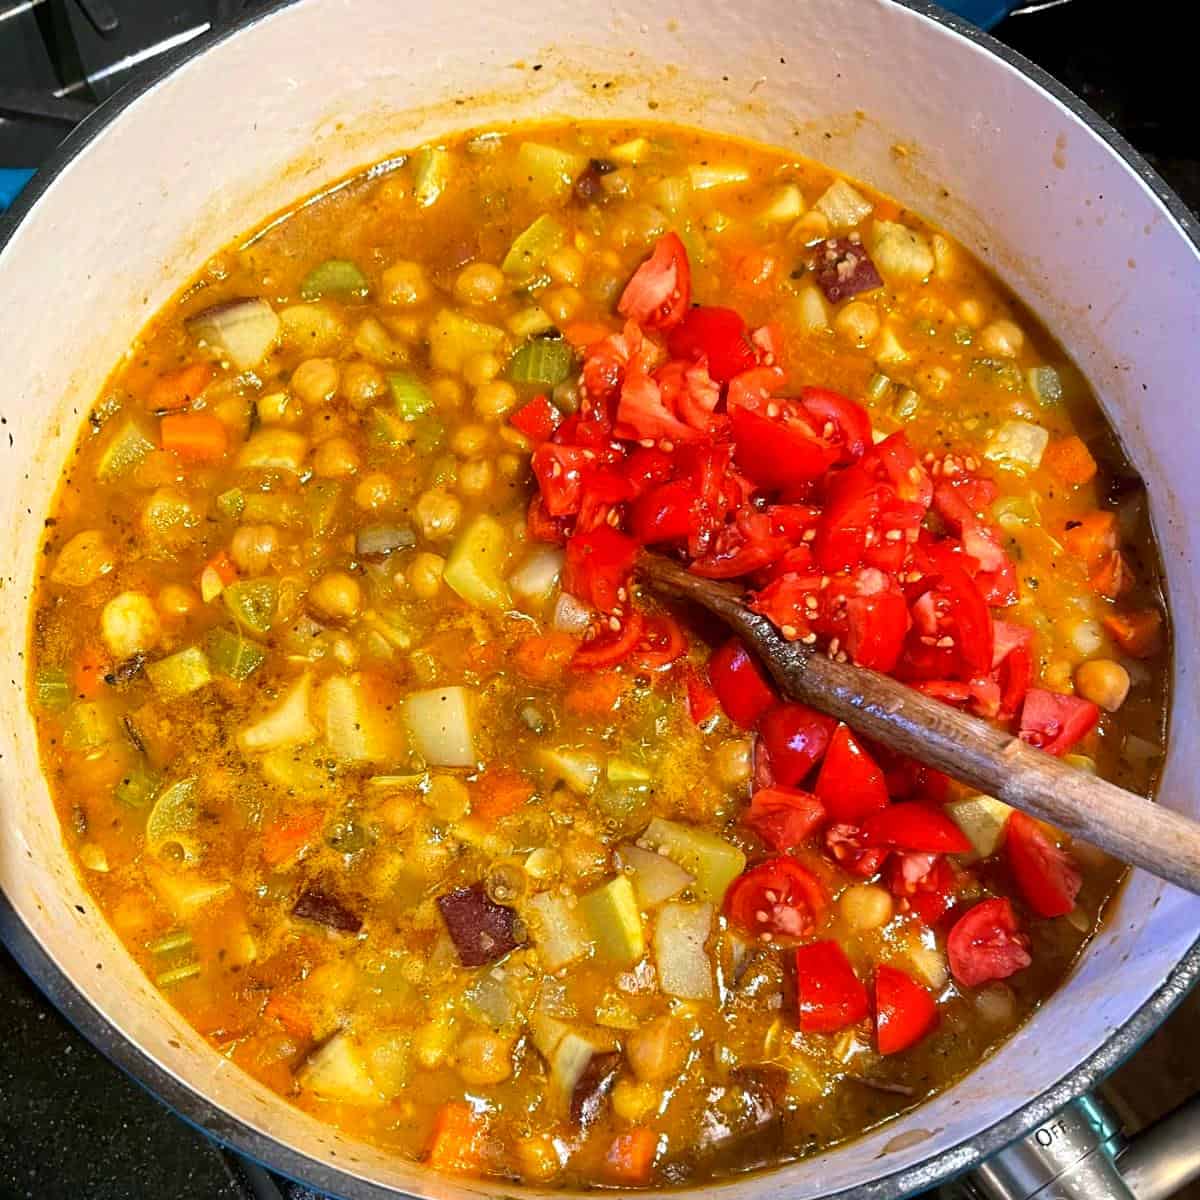 Chopped tomatoes added to stew.